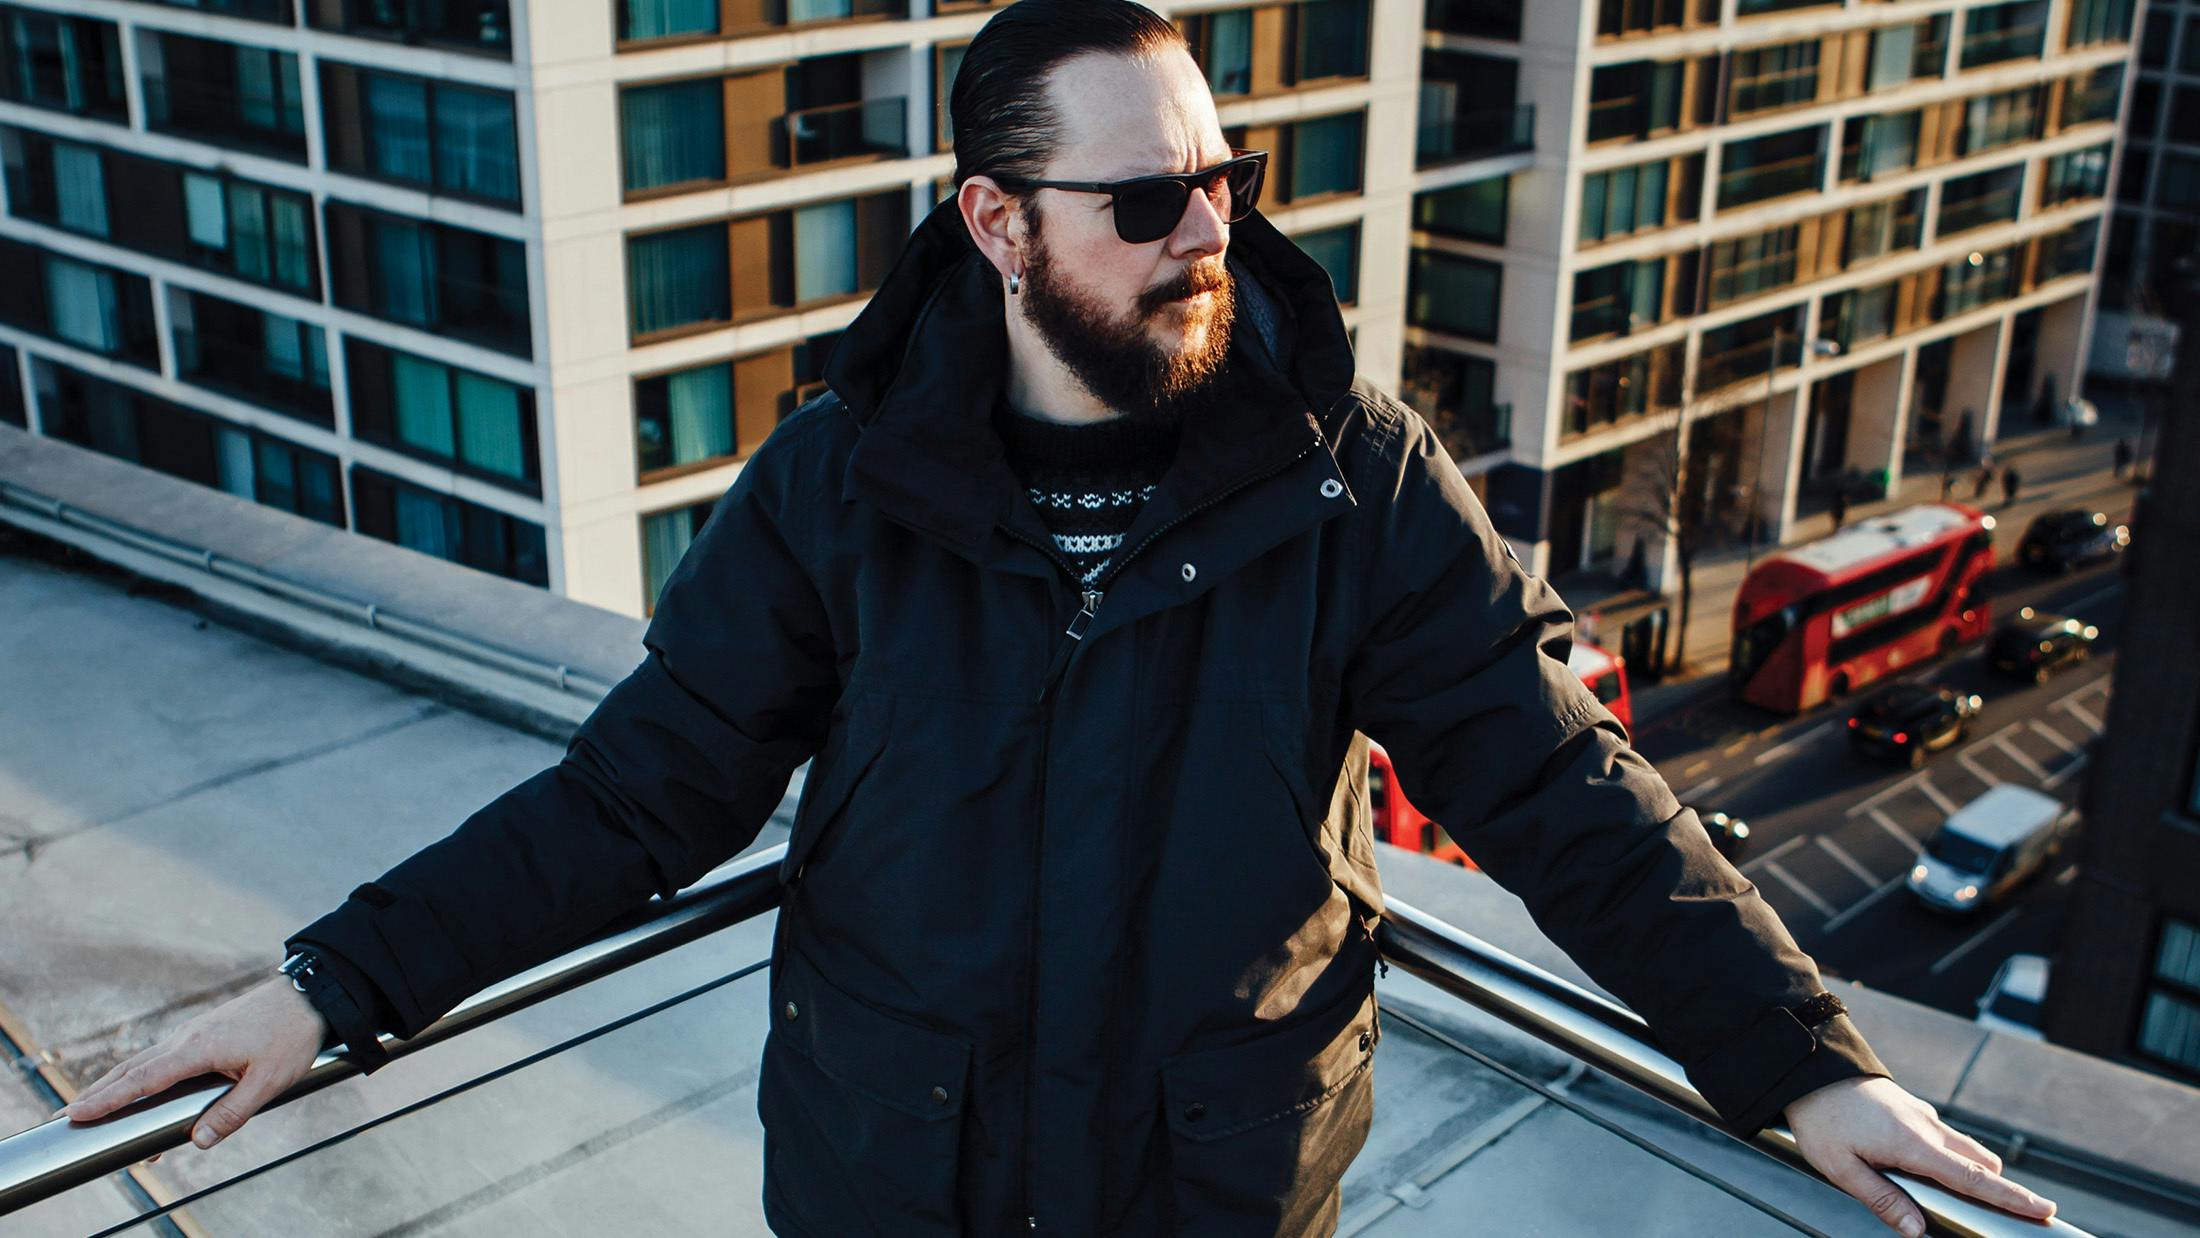 Ihsahn: "A Black Metal Artist Allowing Someone To Tell Them What To Do? Nobody Wants That..."